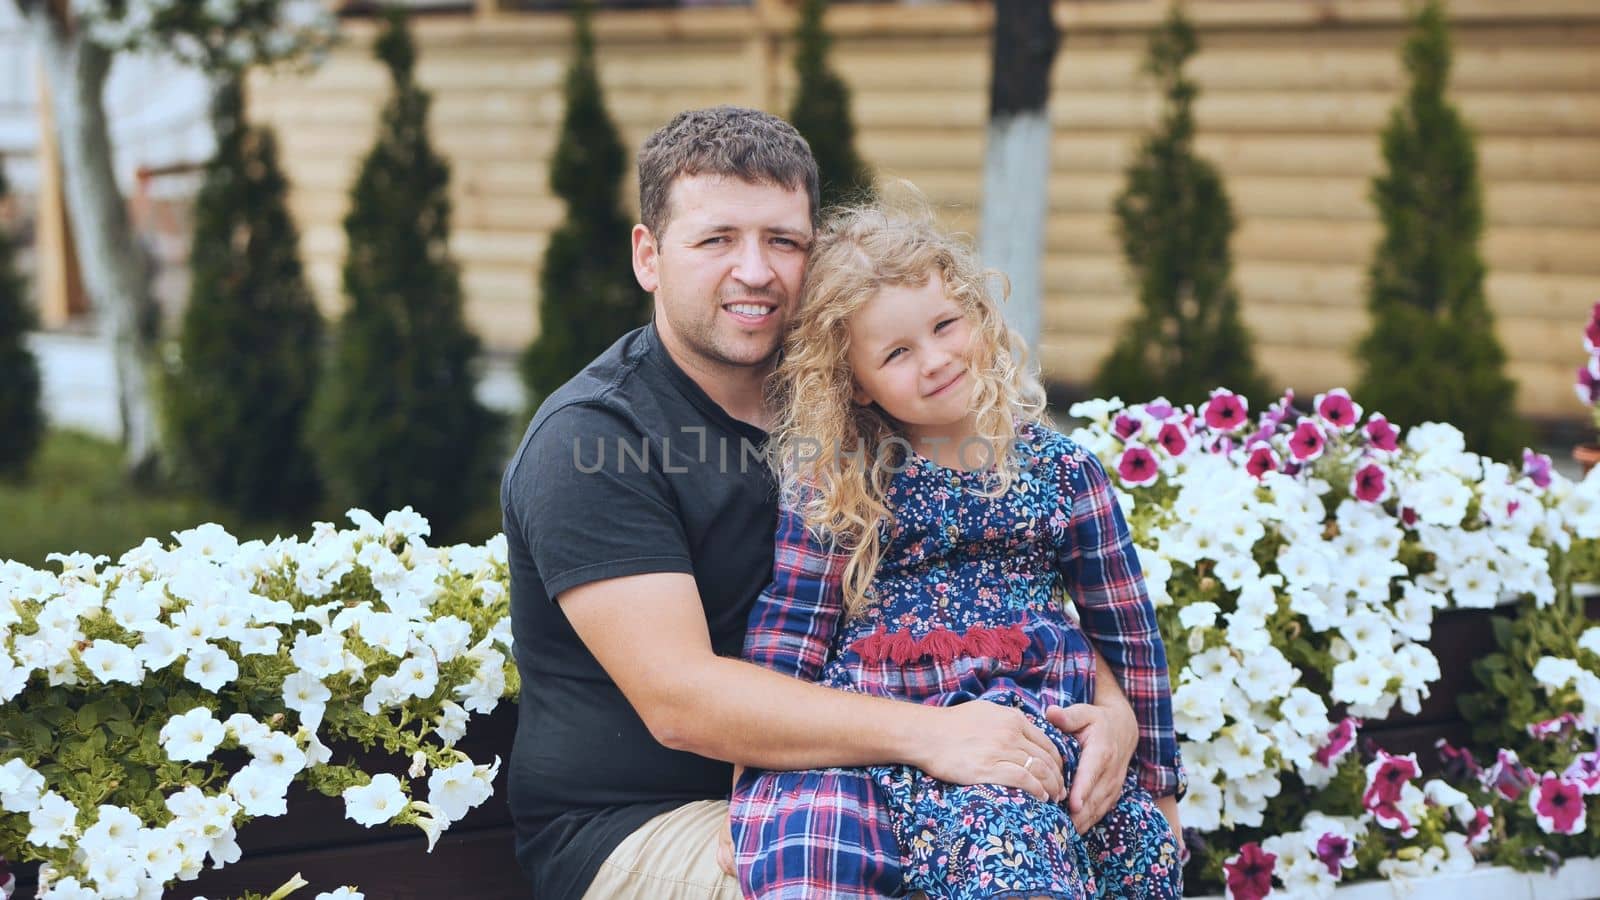 A portrait of a father with his young daughter in the garden against a background of white petunias